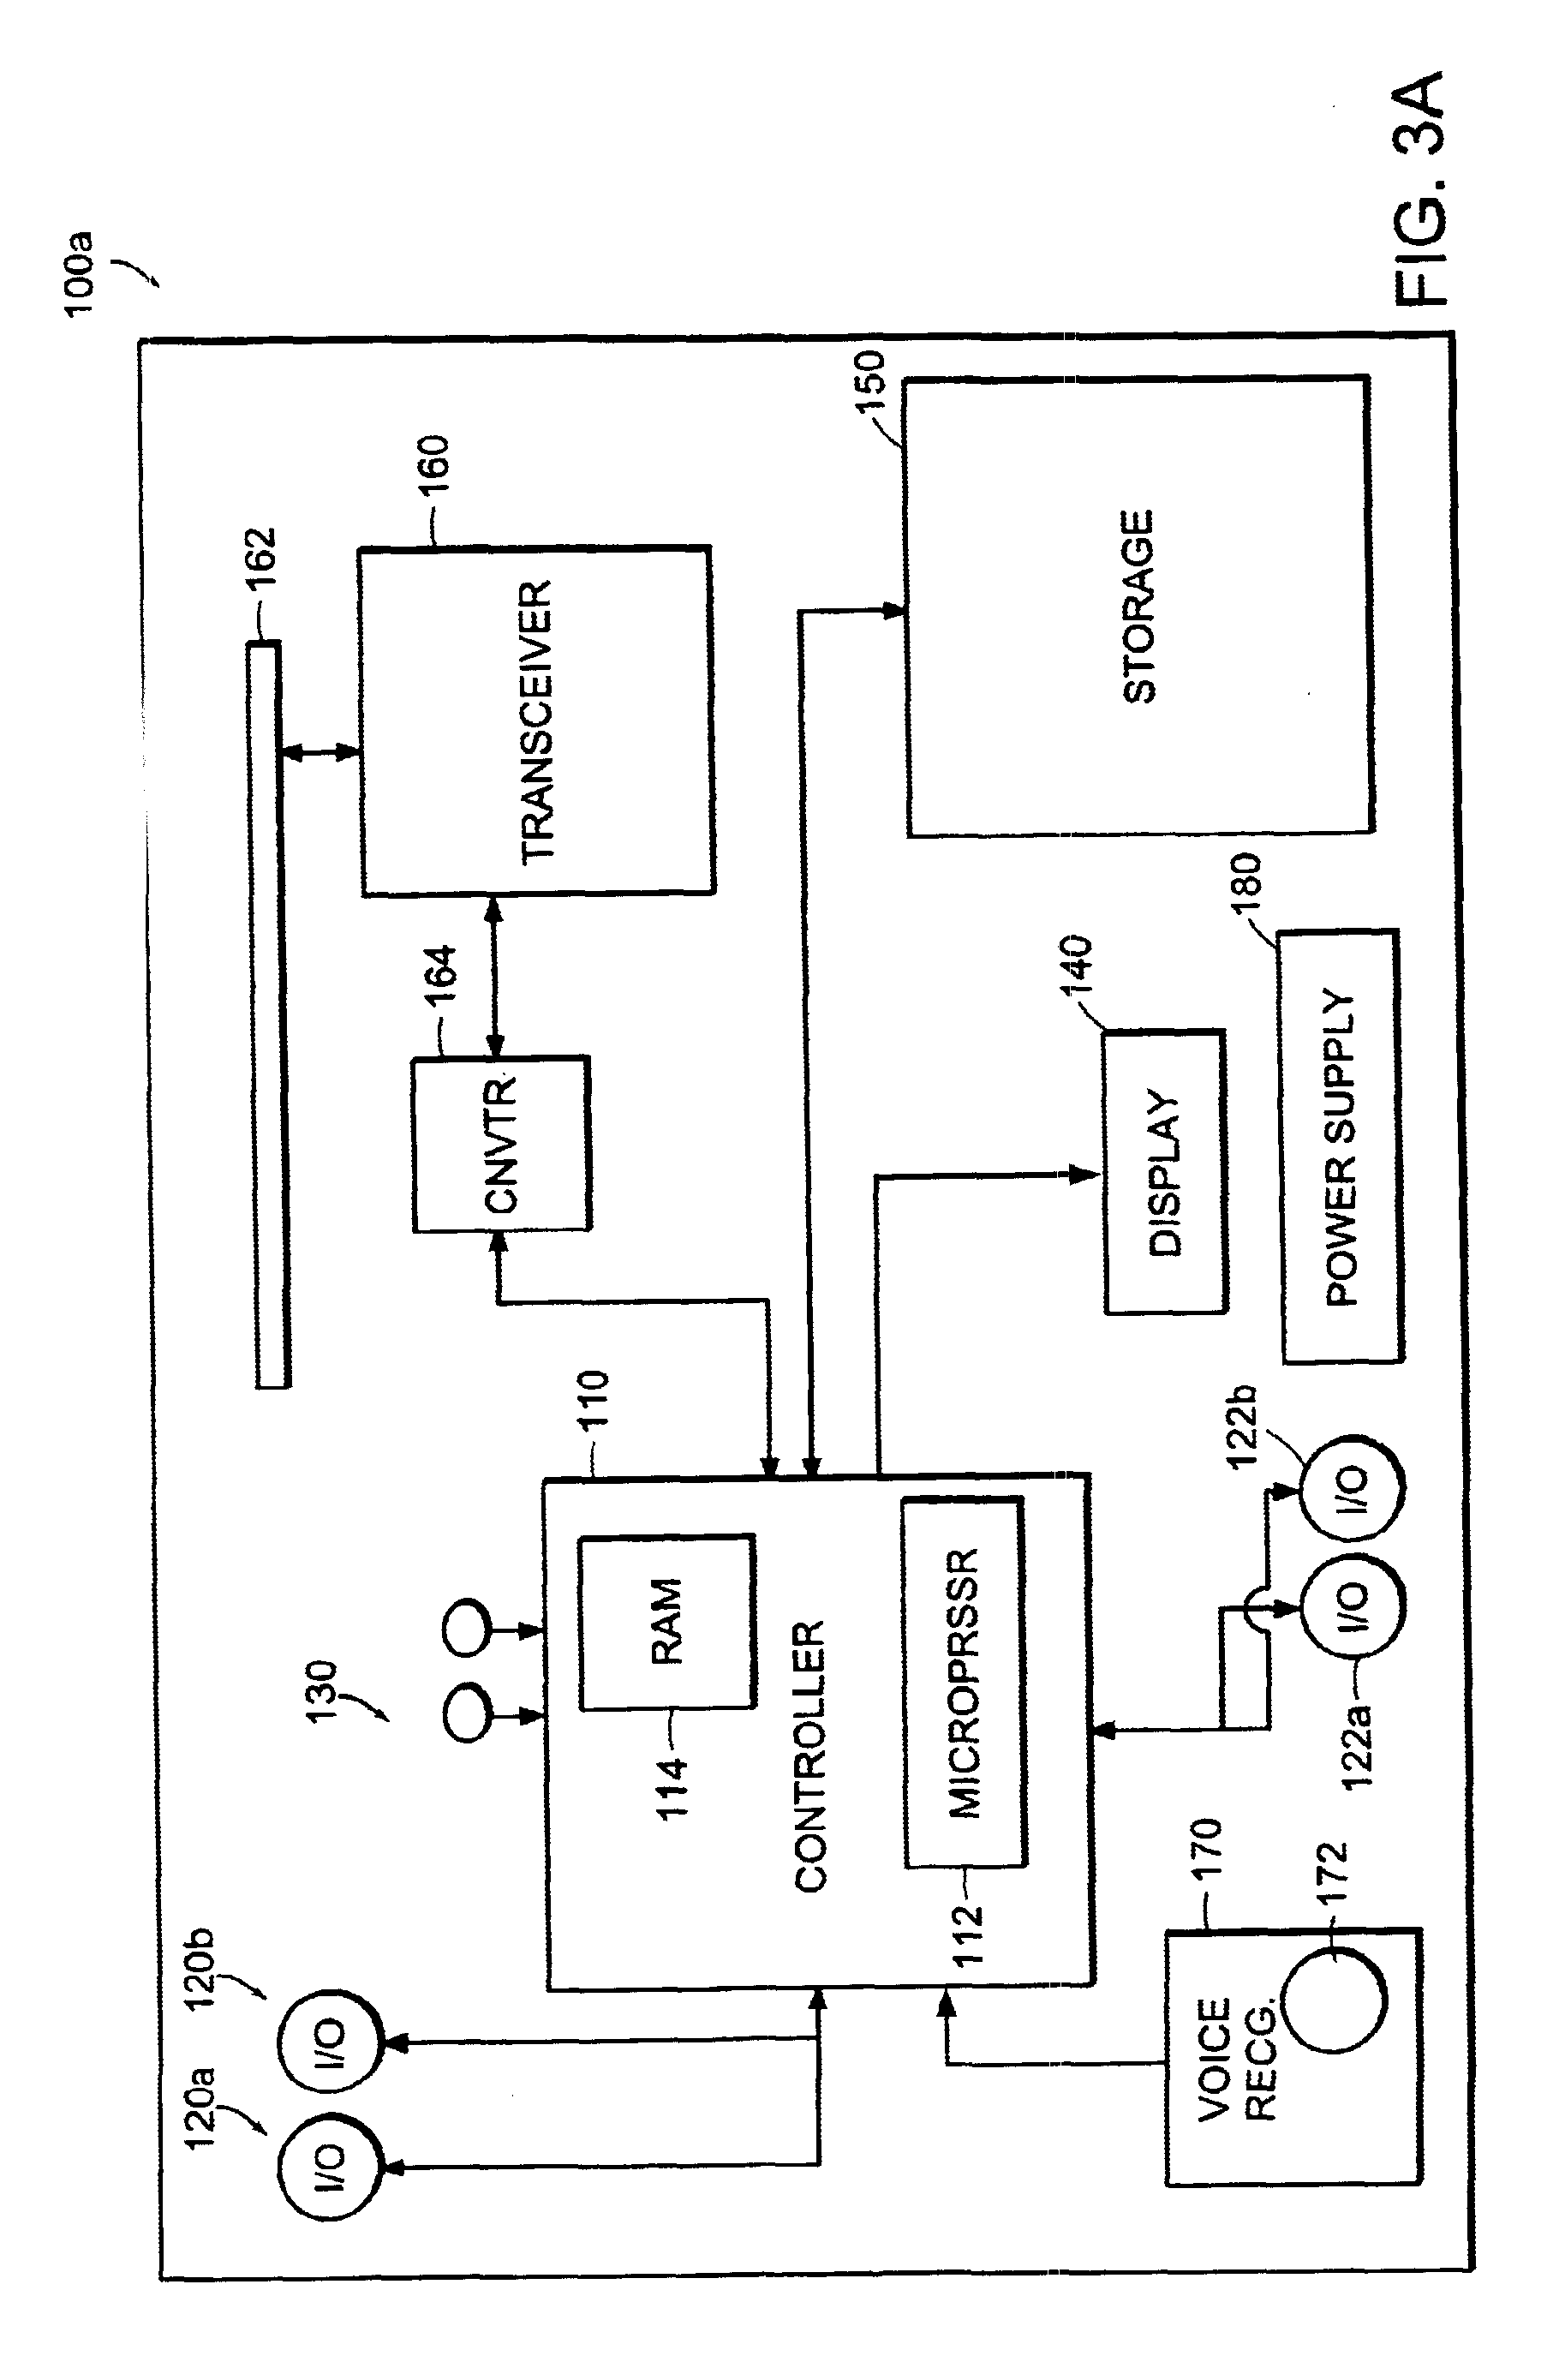 Wireless digital camera adapter and systems and methods related thereto and for use with such an adapter